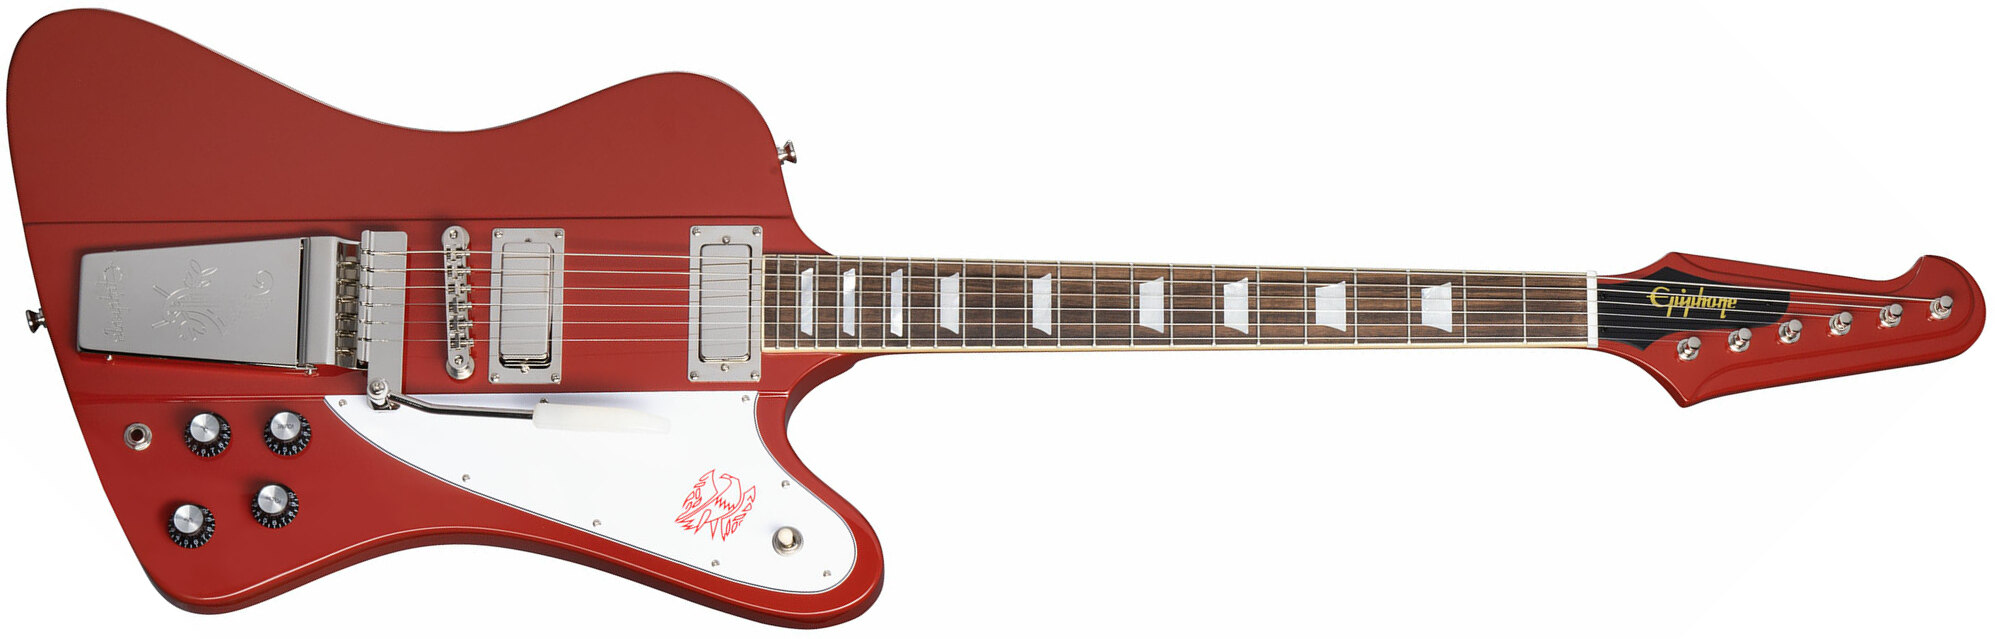 Epiphone Firebird V 1963 Maestro Vibrola Inspired By Gibson Custom 2mh Trem Lau - Ember Red - Guitare Électrique RÉtro Rock - Main picture